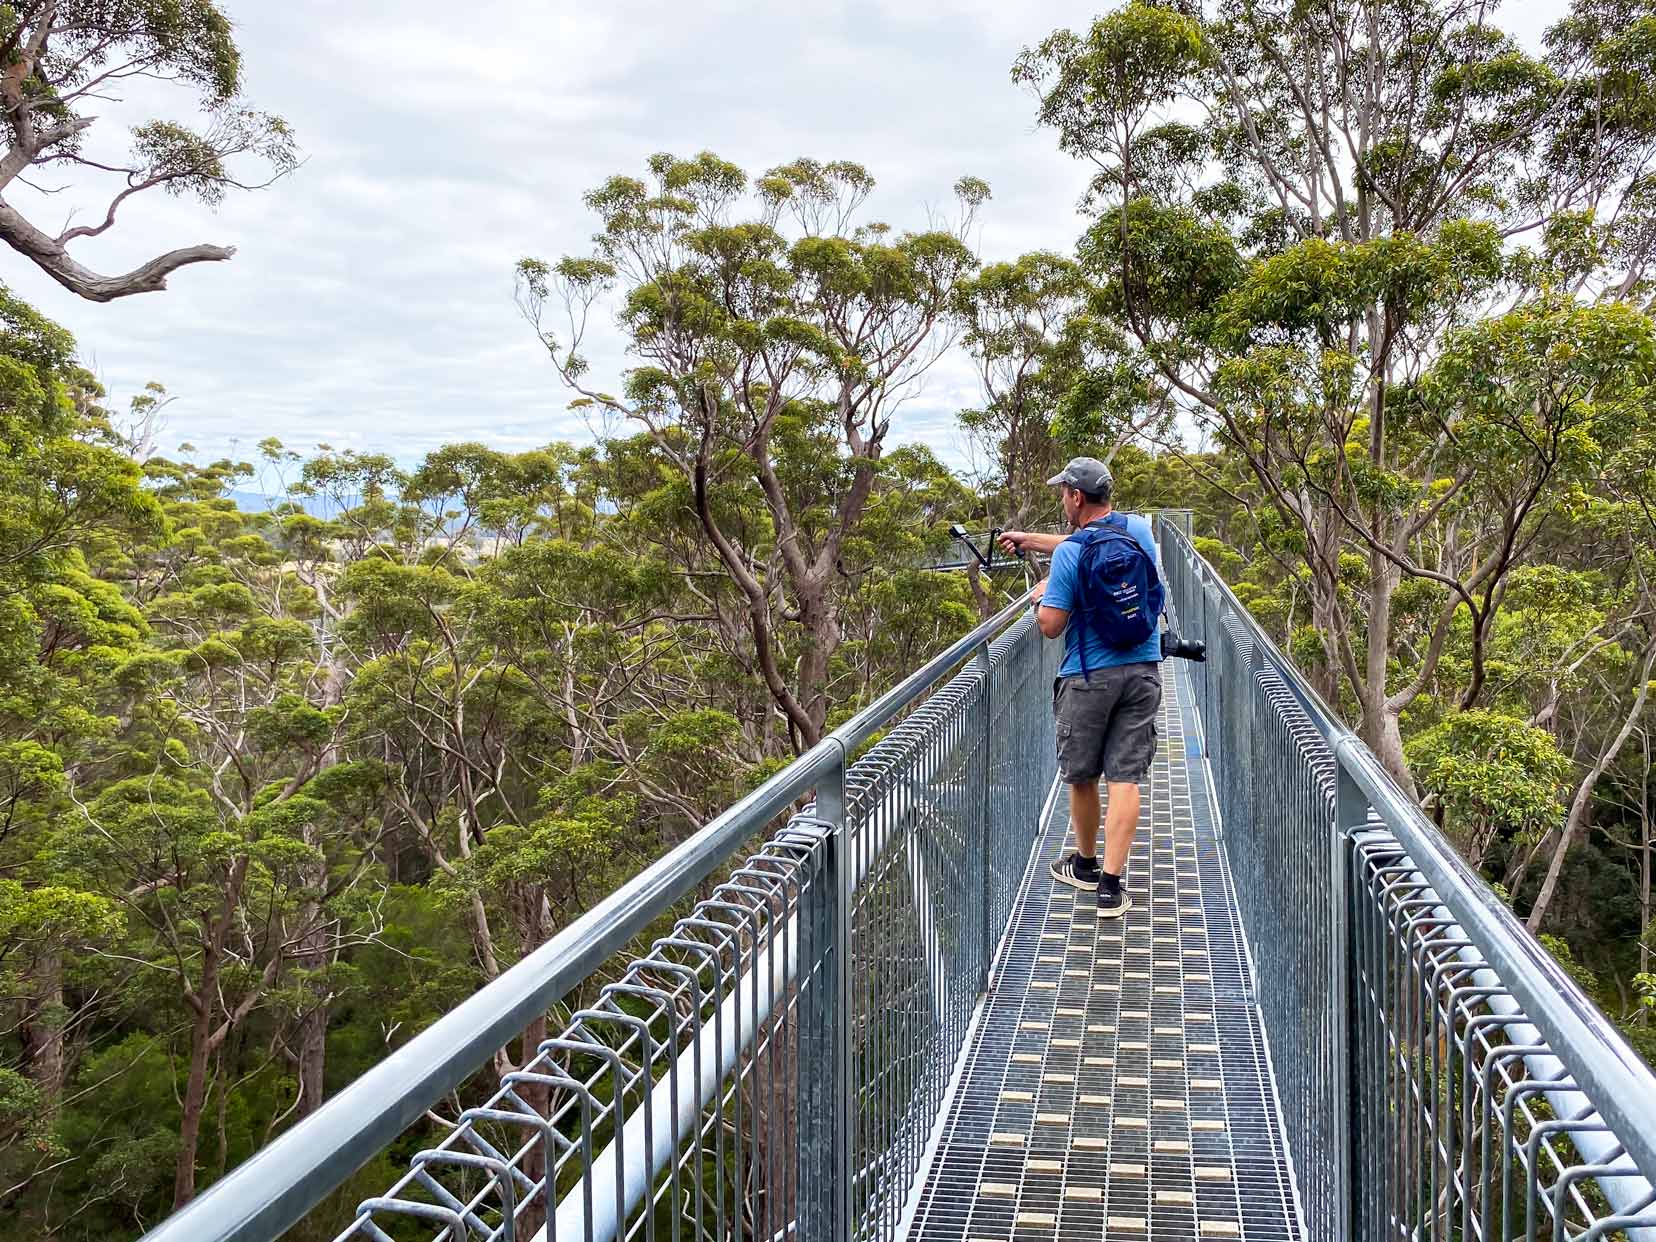 Lars walking along the tree top walk walpole - silver bridge gridded so you can see through it with the tops of the tingle trees in view